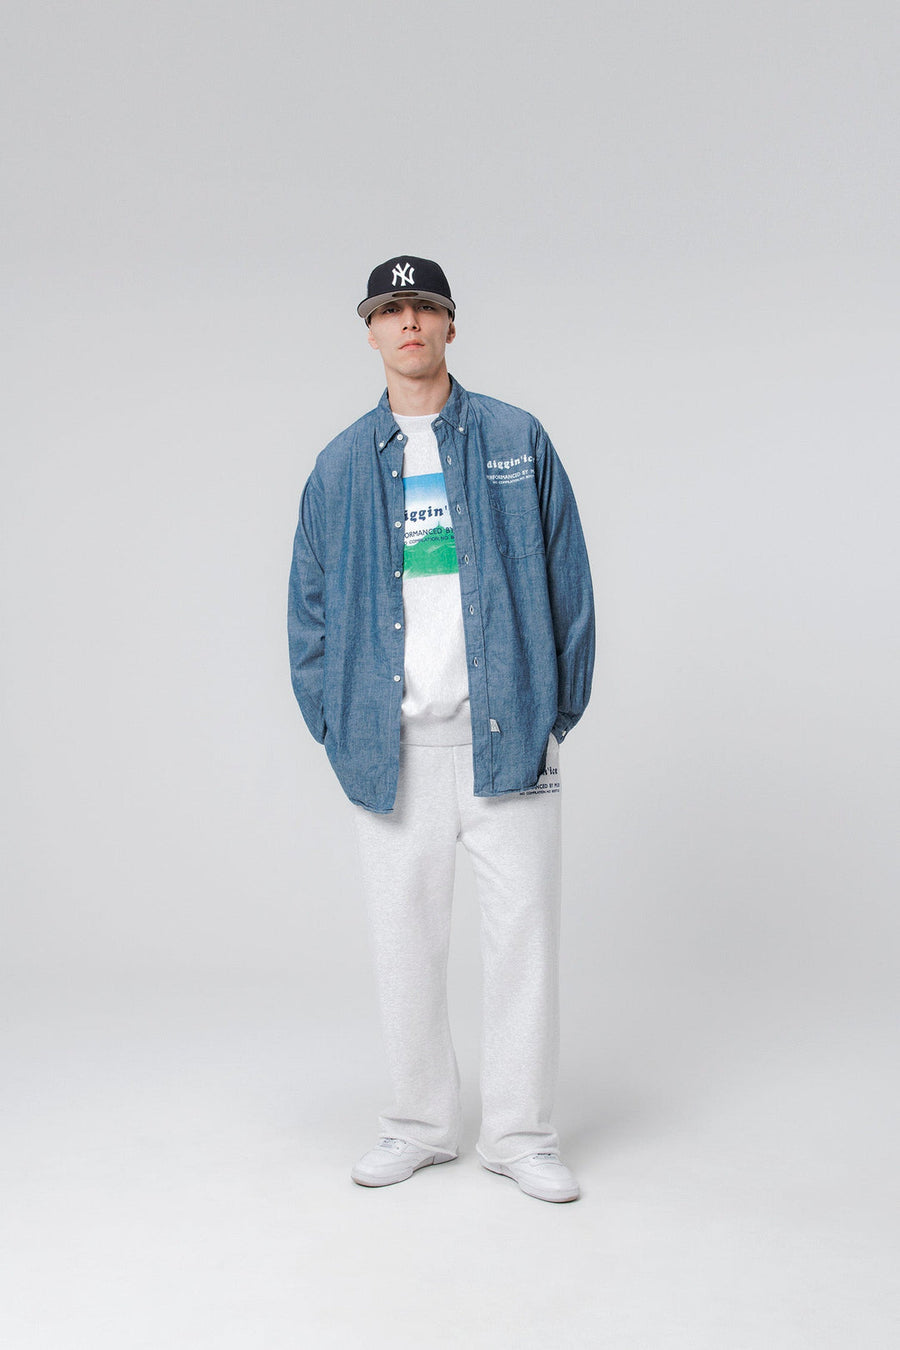 〈RECOGNIZE〉DIGGIN' ICE 96 CHAMBRAY SHIRTS